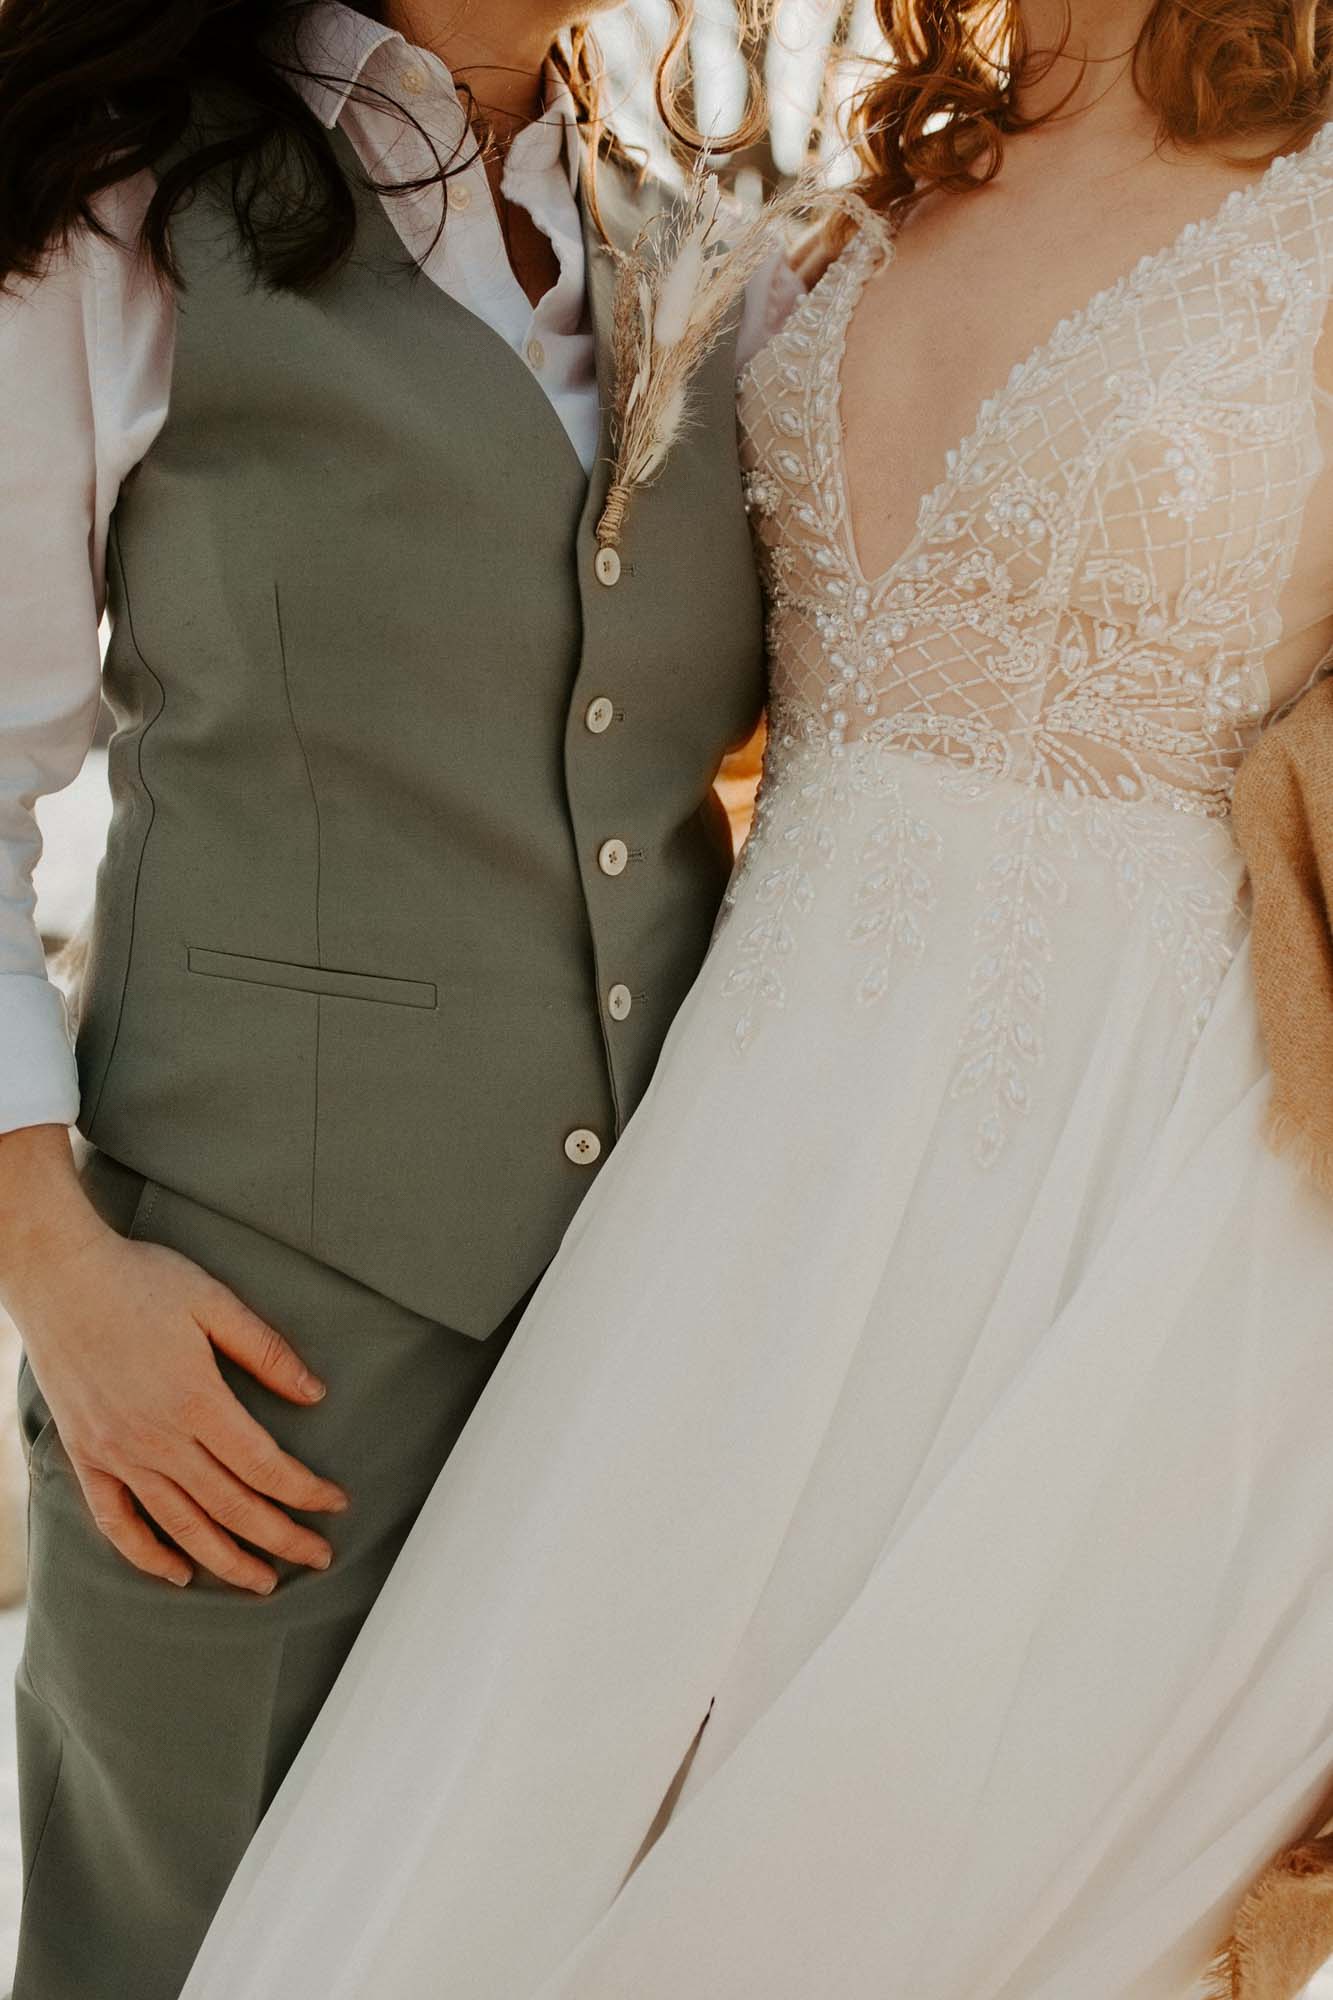 close up of suit and wedding dress